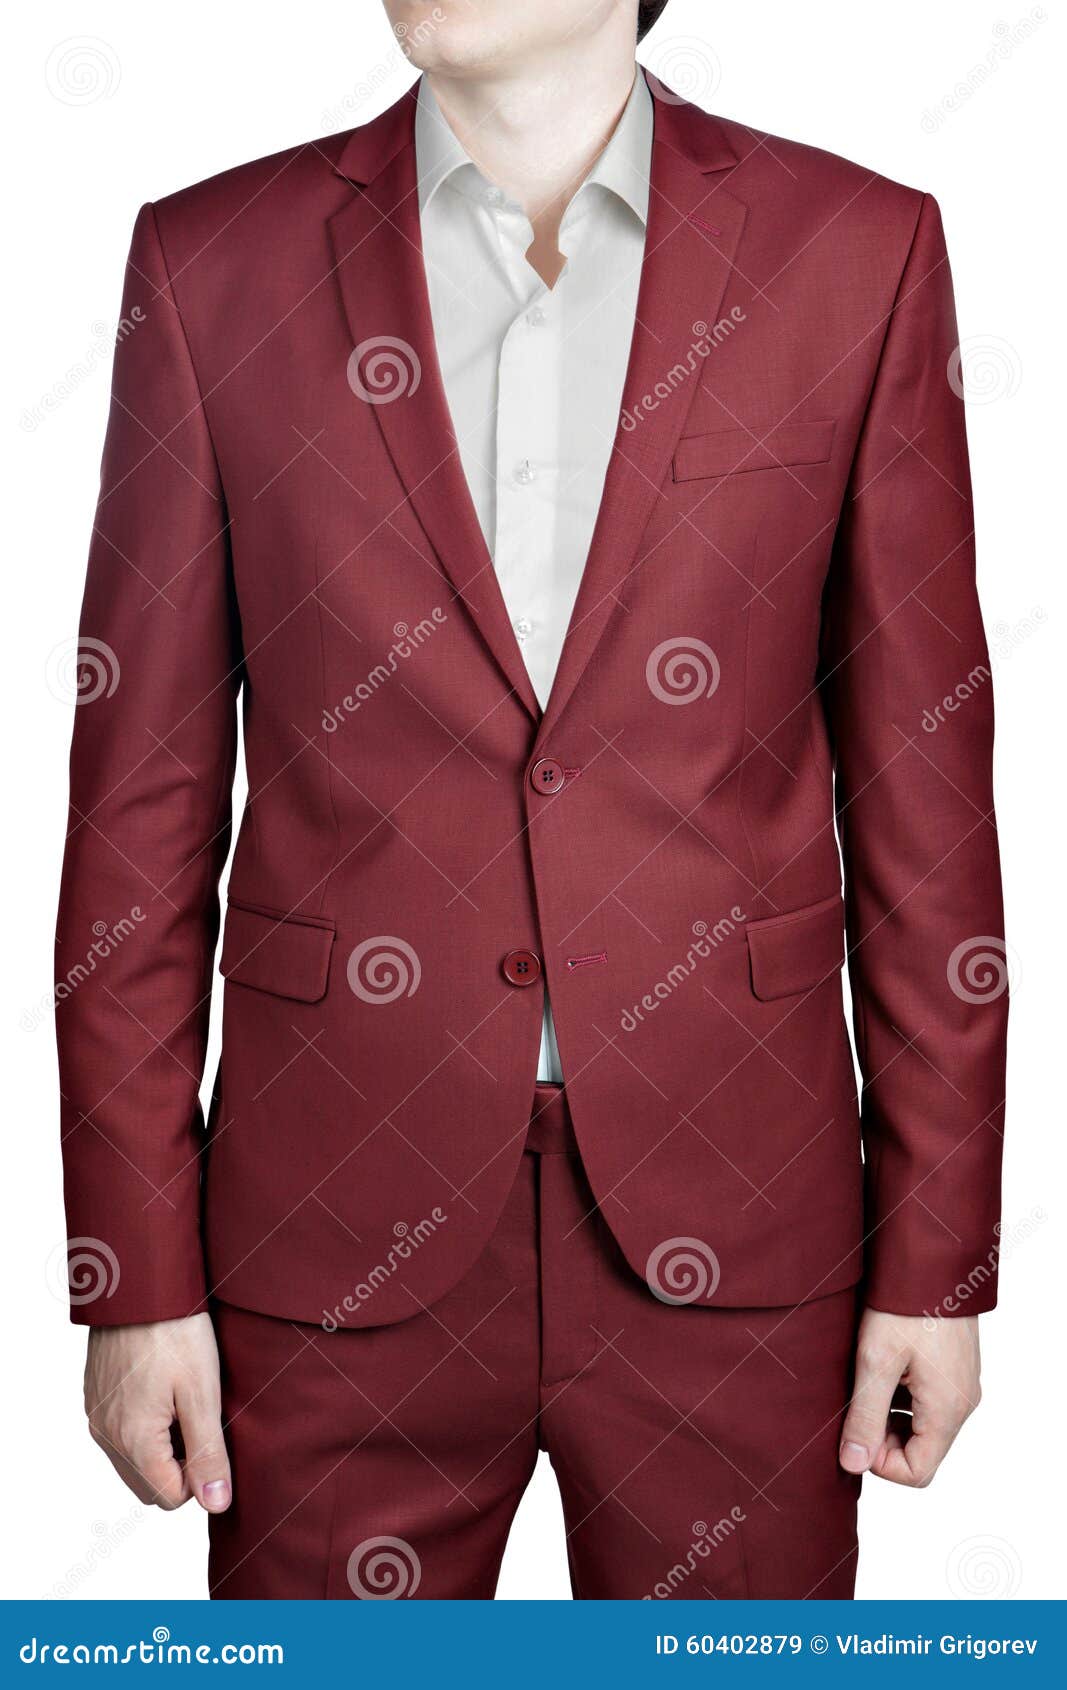 Maroon Color Prom Suit For Men, Isolated On White